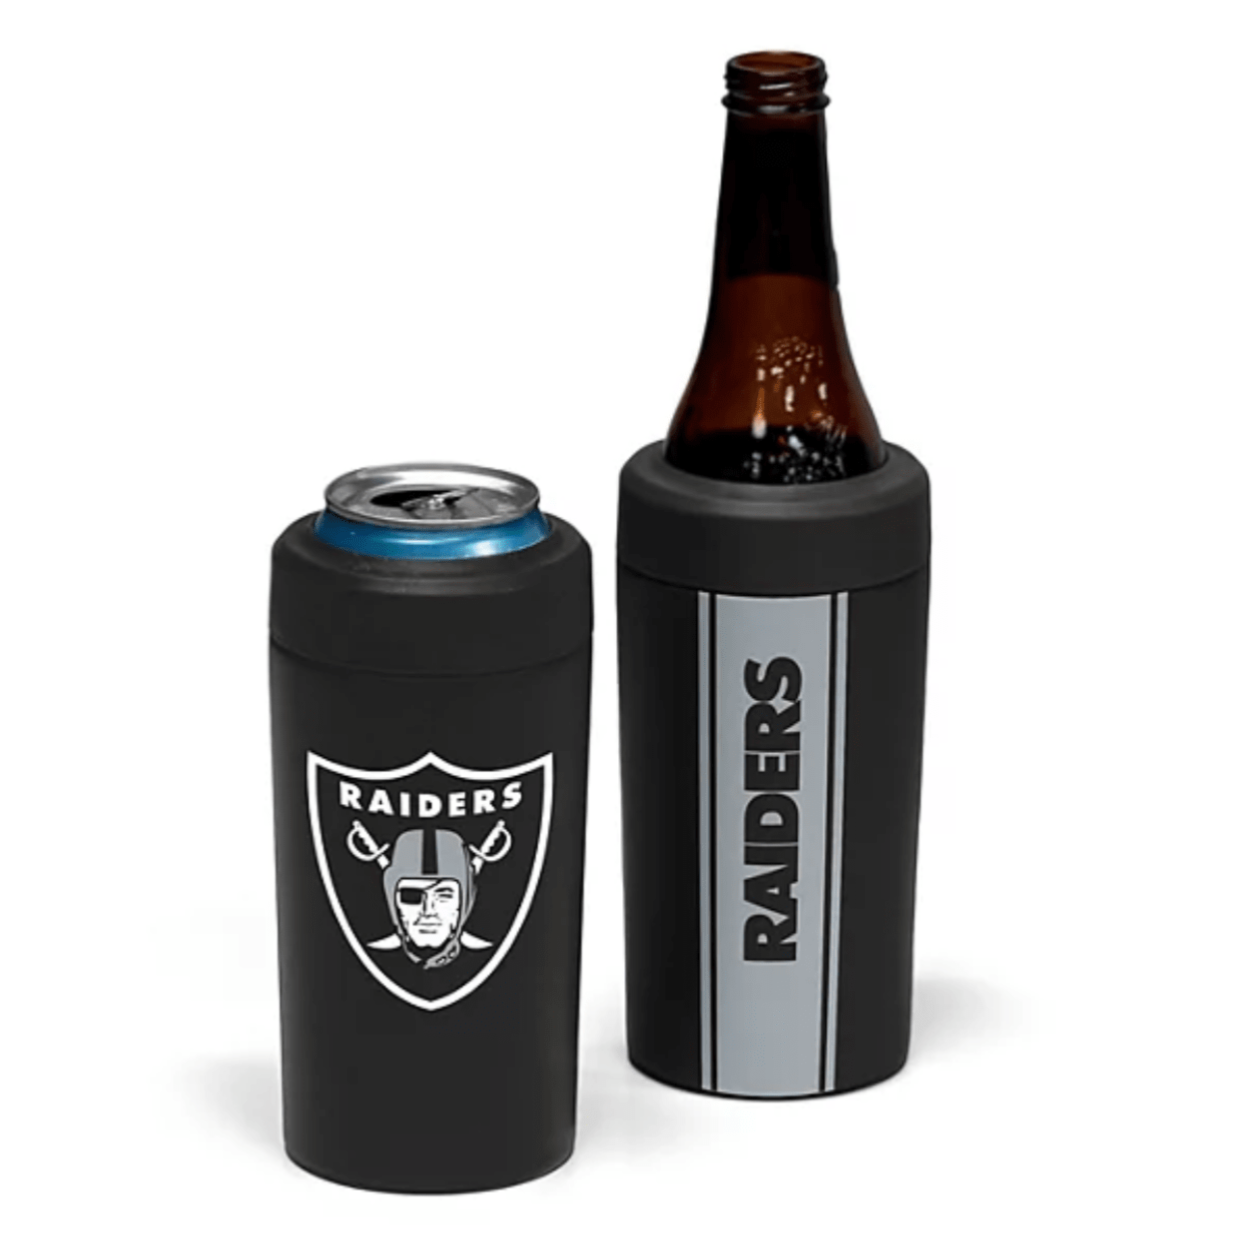 Frost buddy universal can cooler